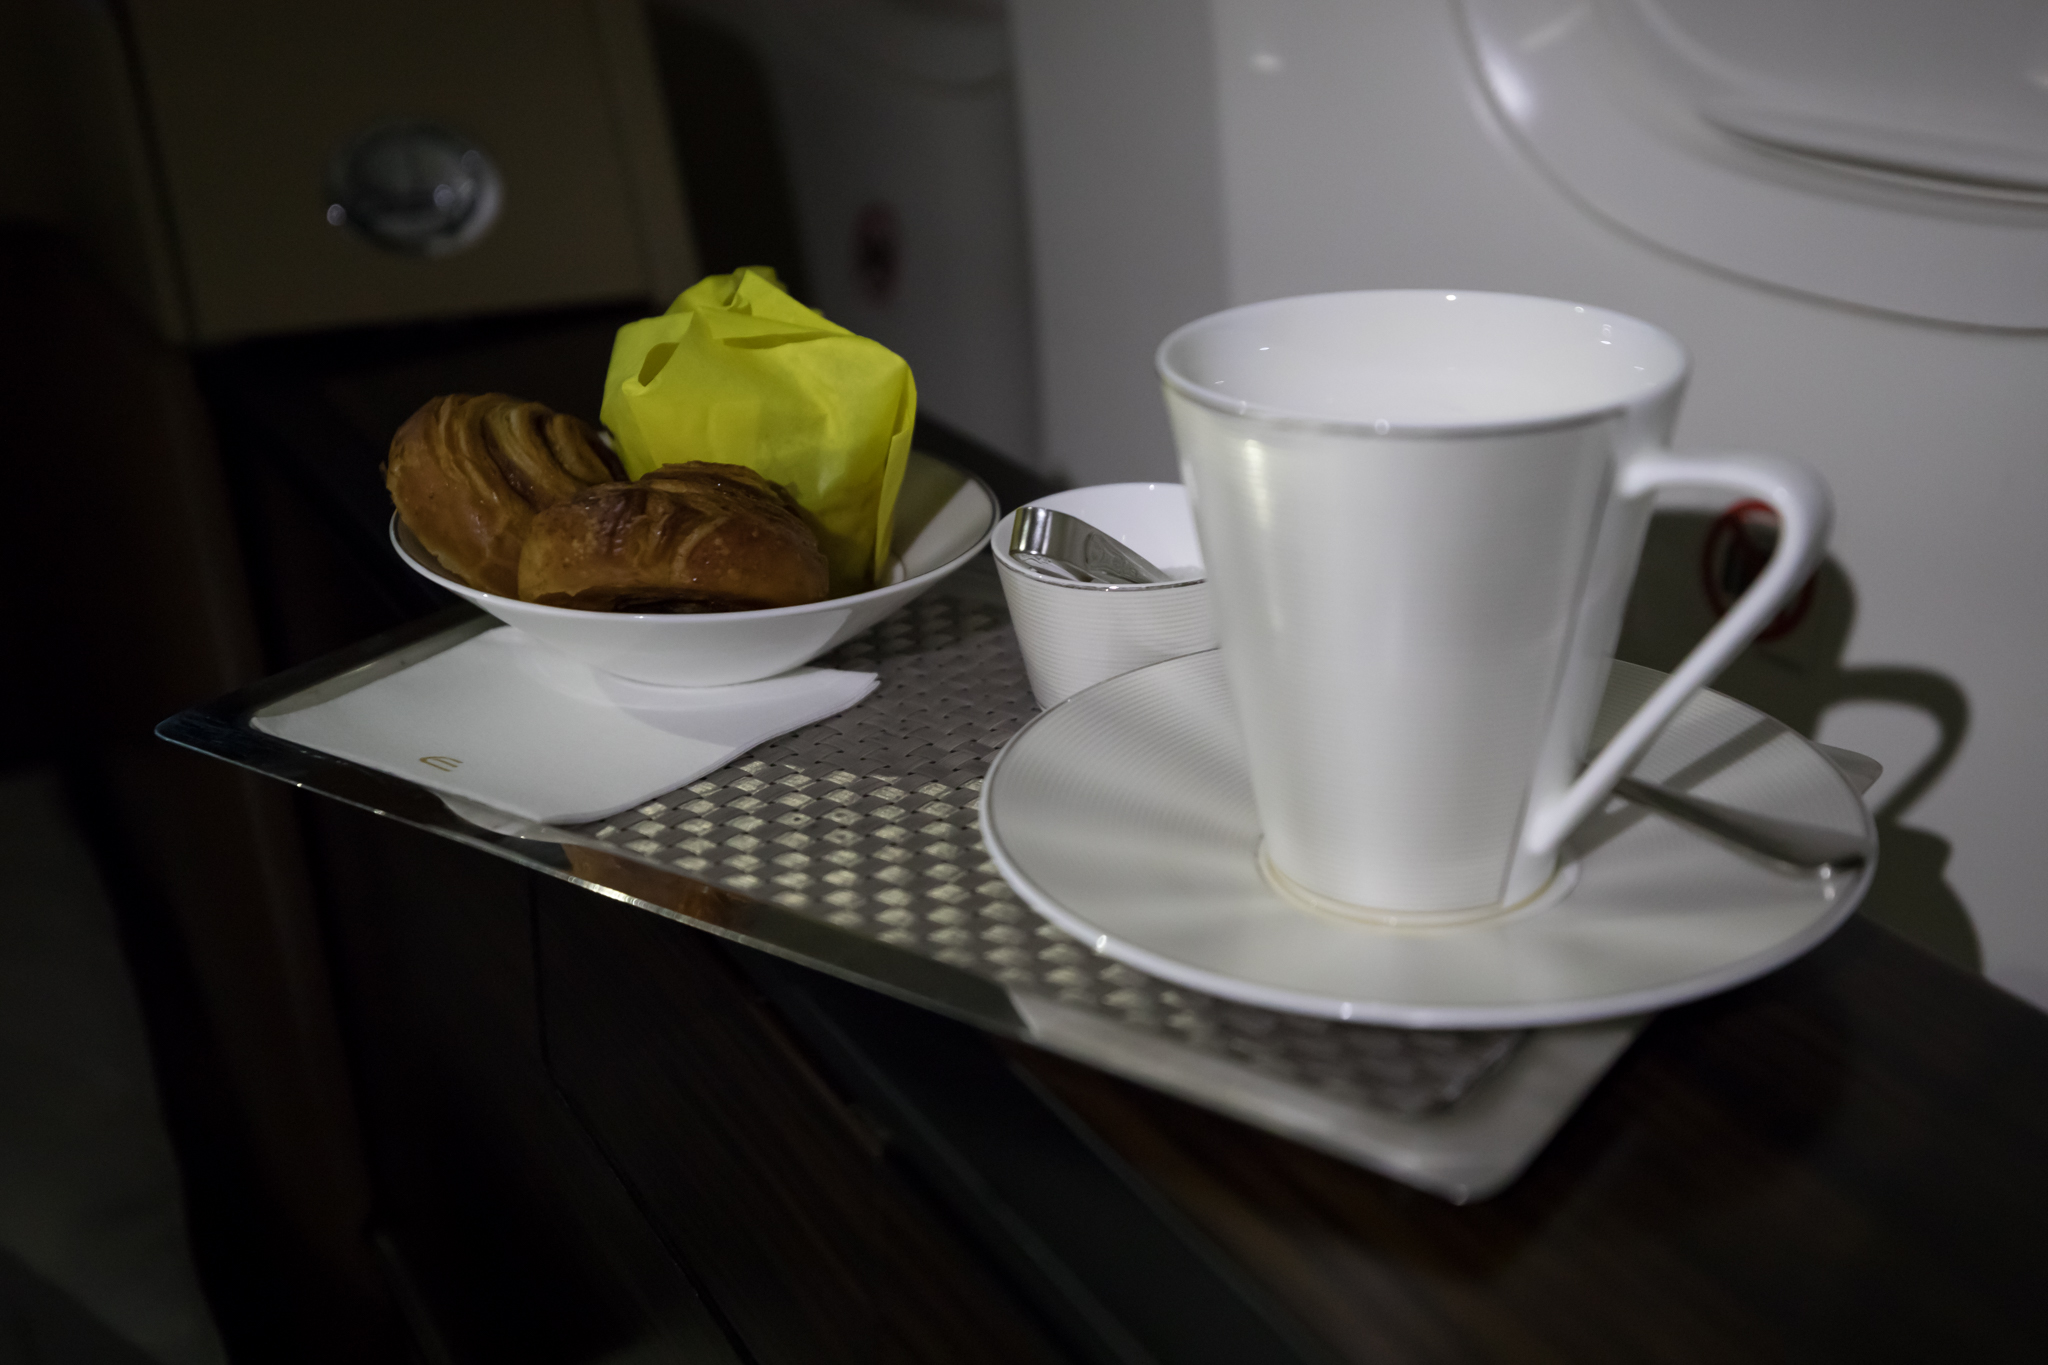 a cup and saucer with food on a tray